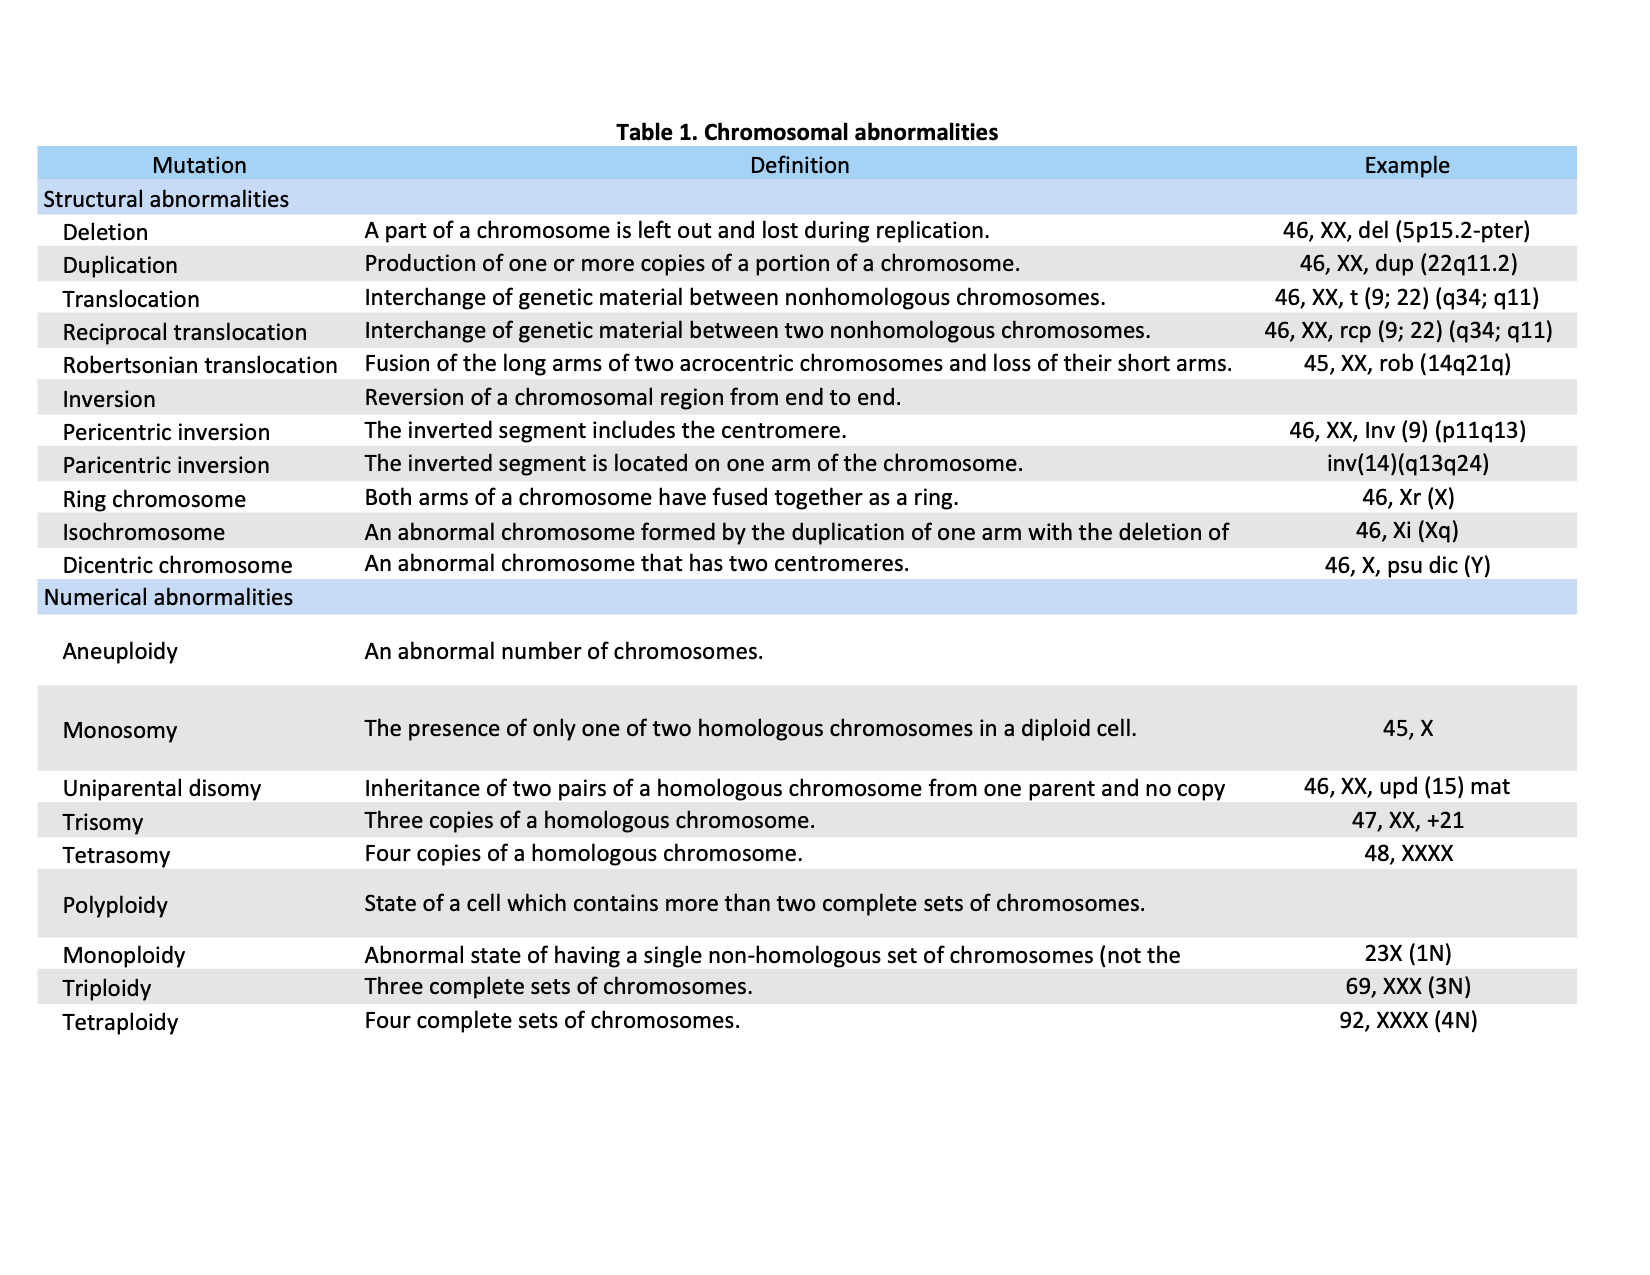 Table 1. Definitions and examples of chromosomal abnormalities as classified by numerical or structural aberrations.